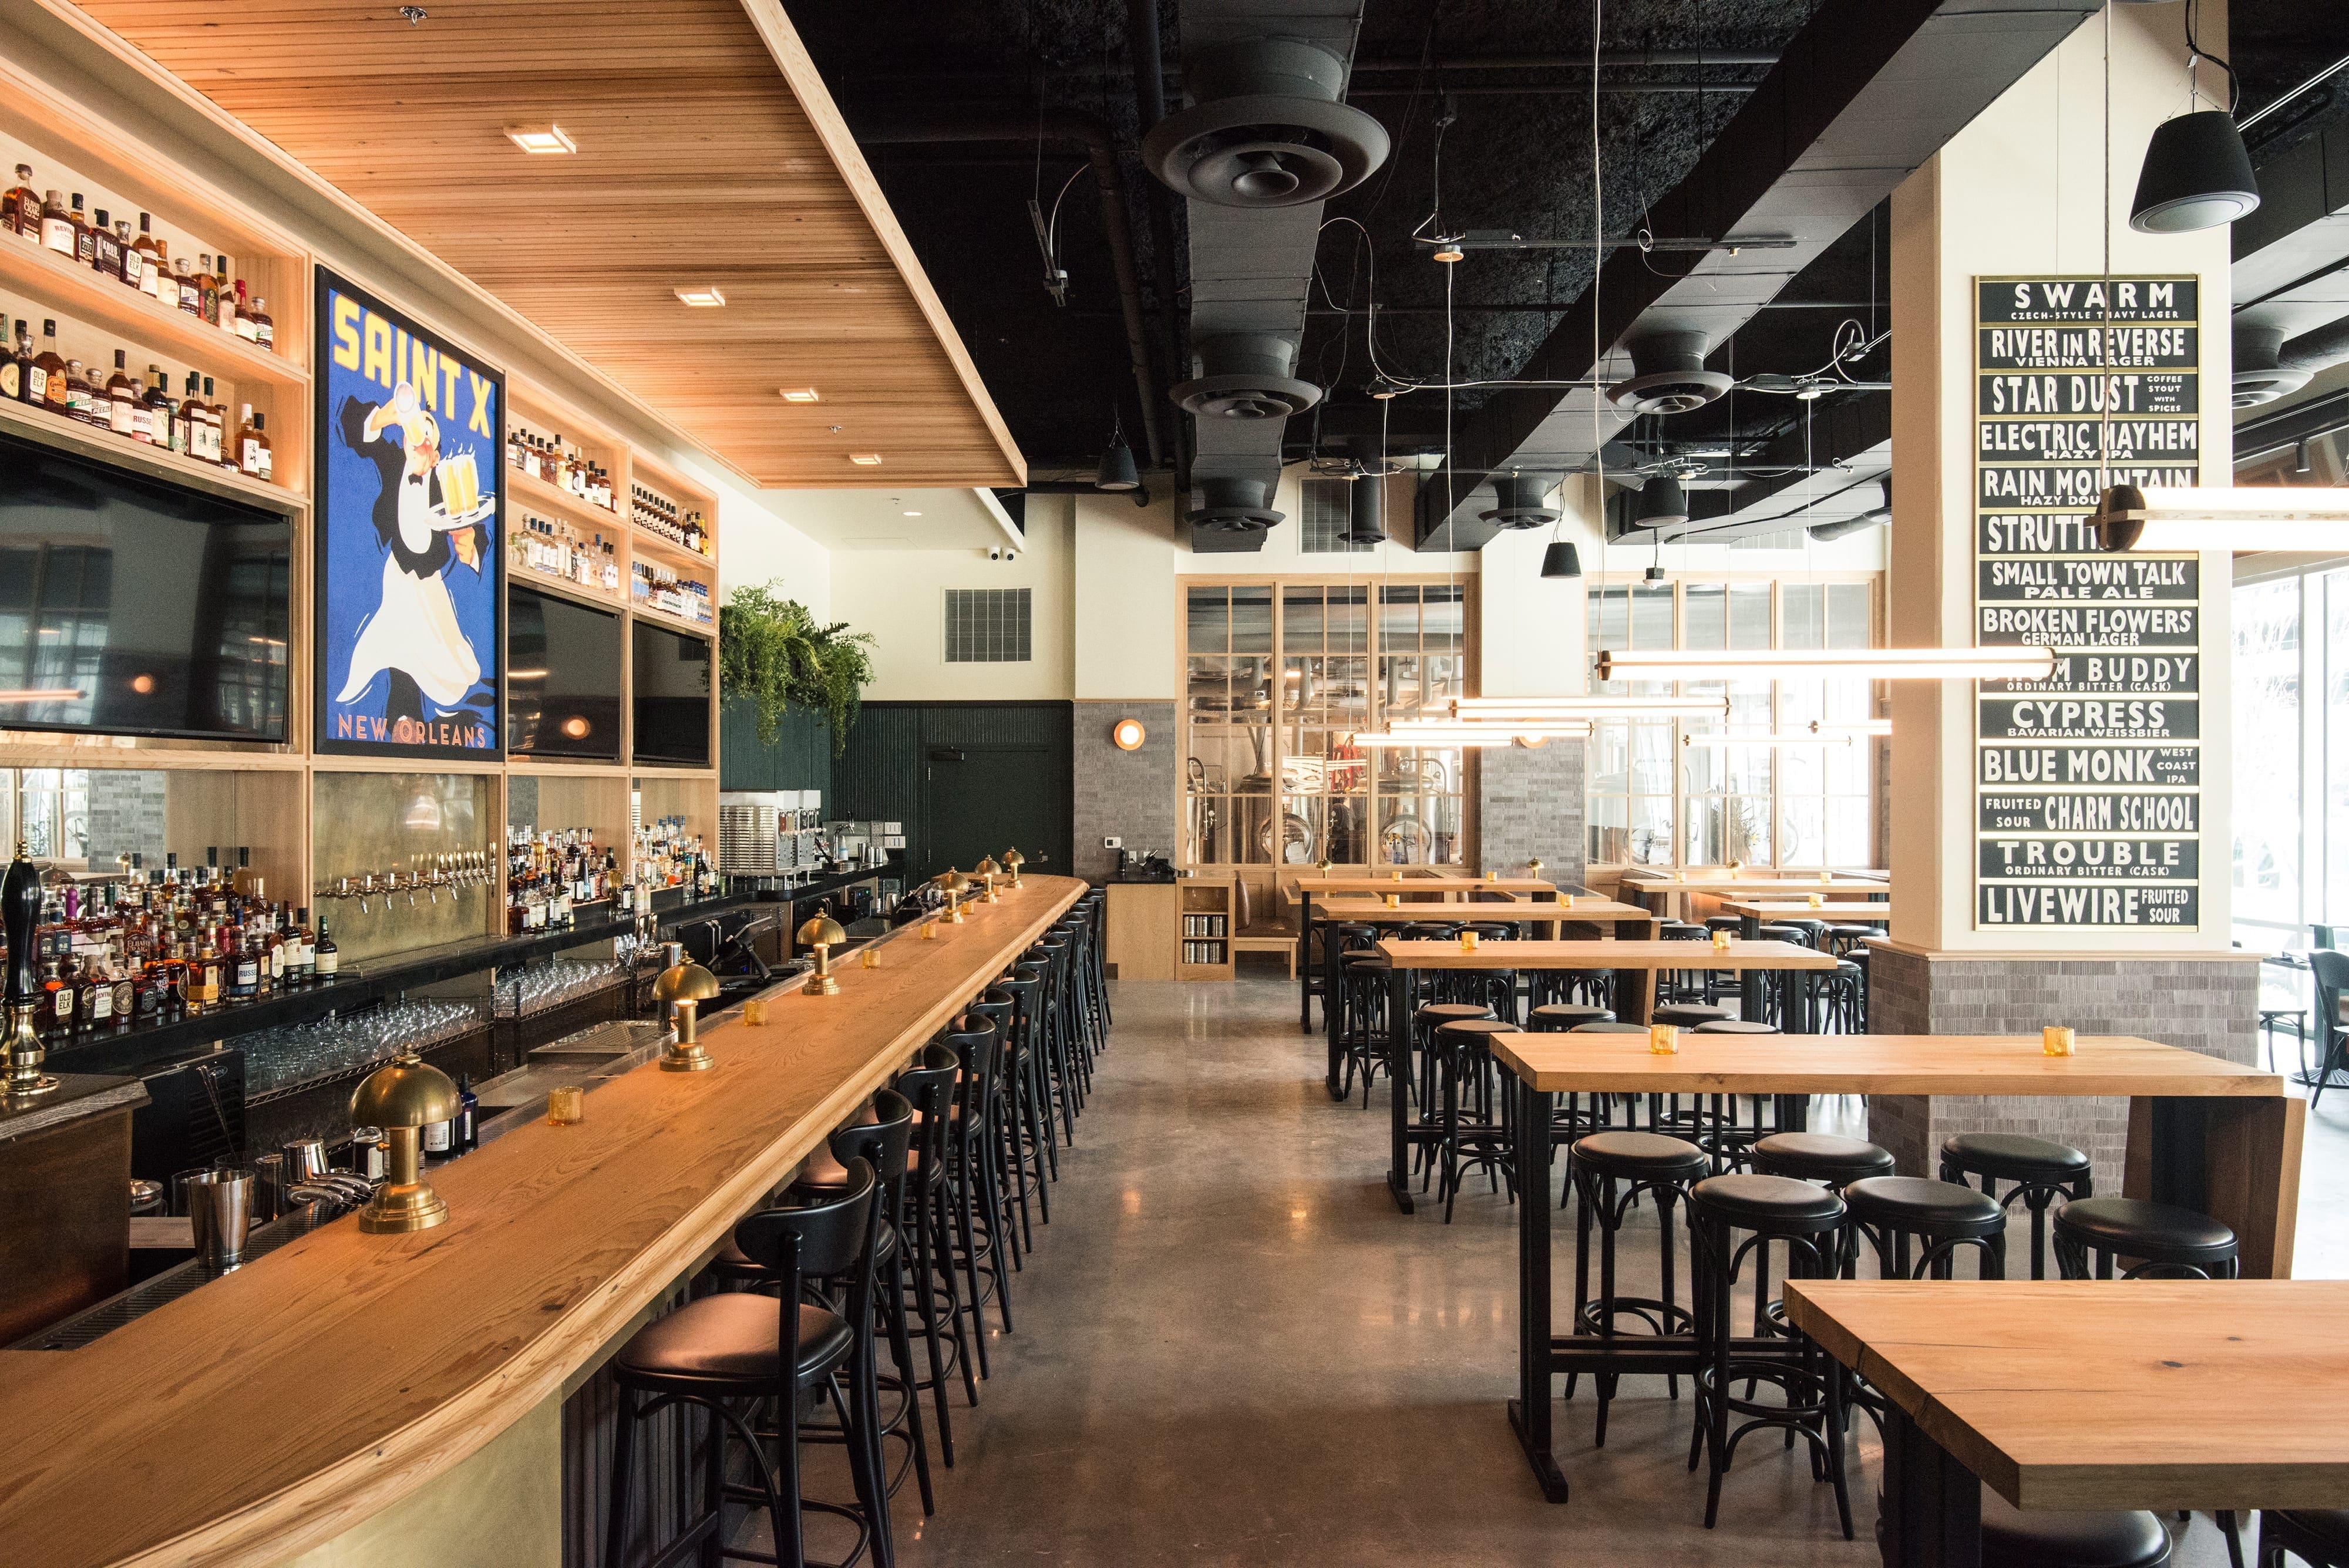 Bar and eating area from Brewery Saint X located in New Orleans